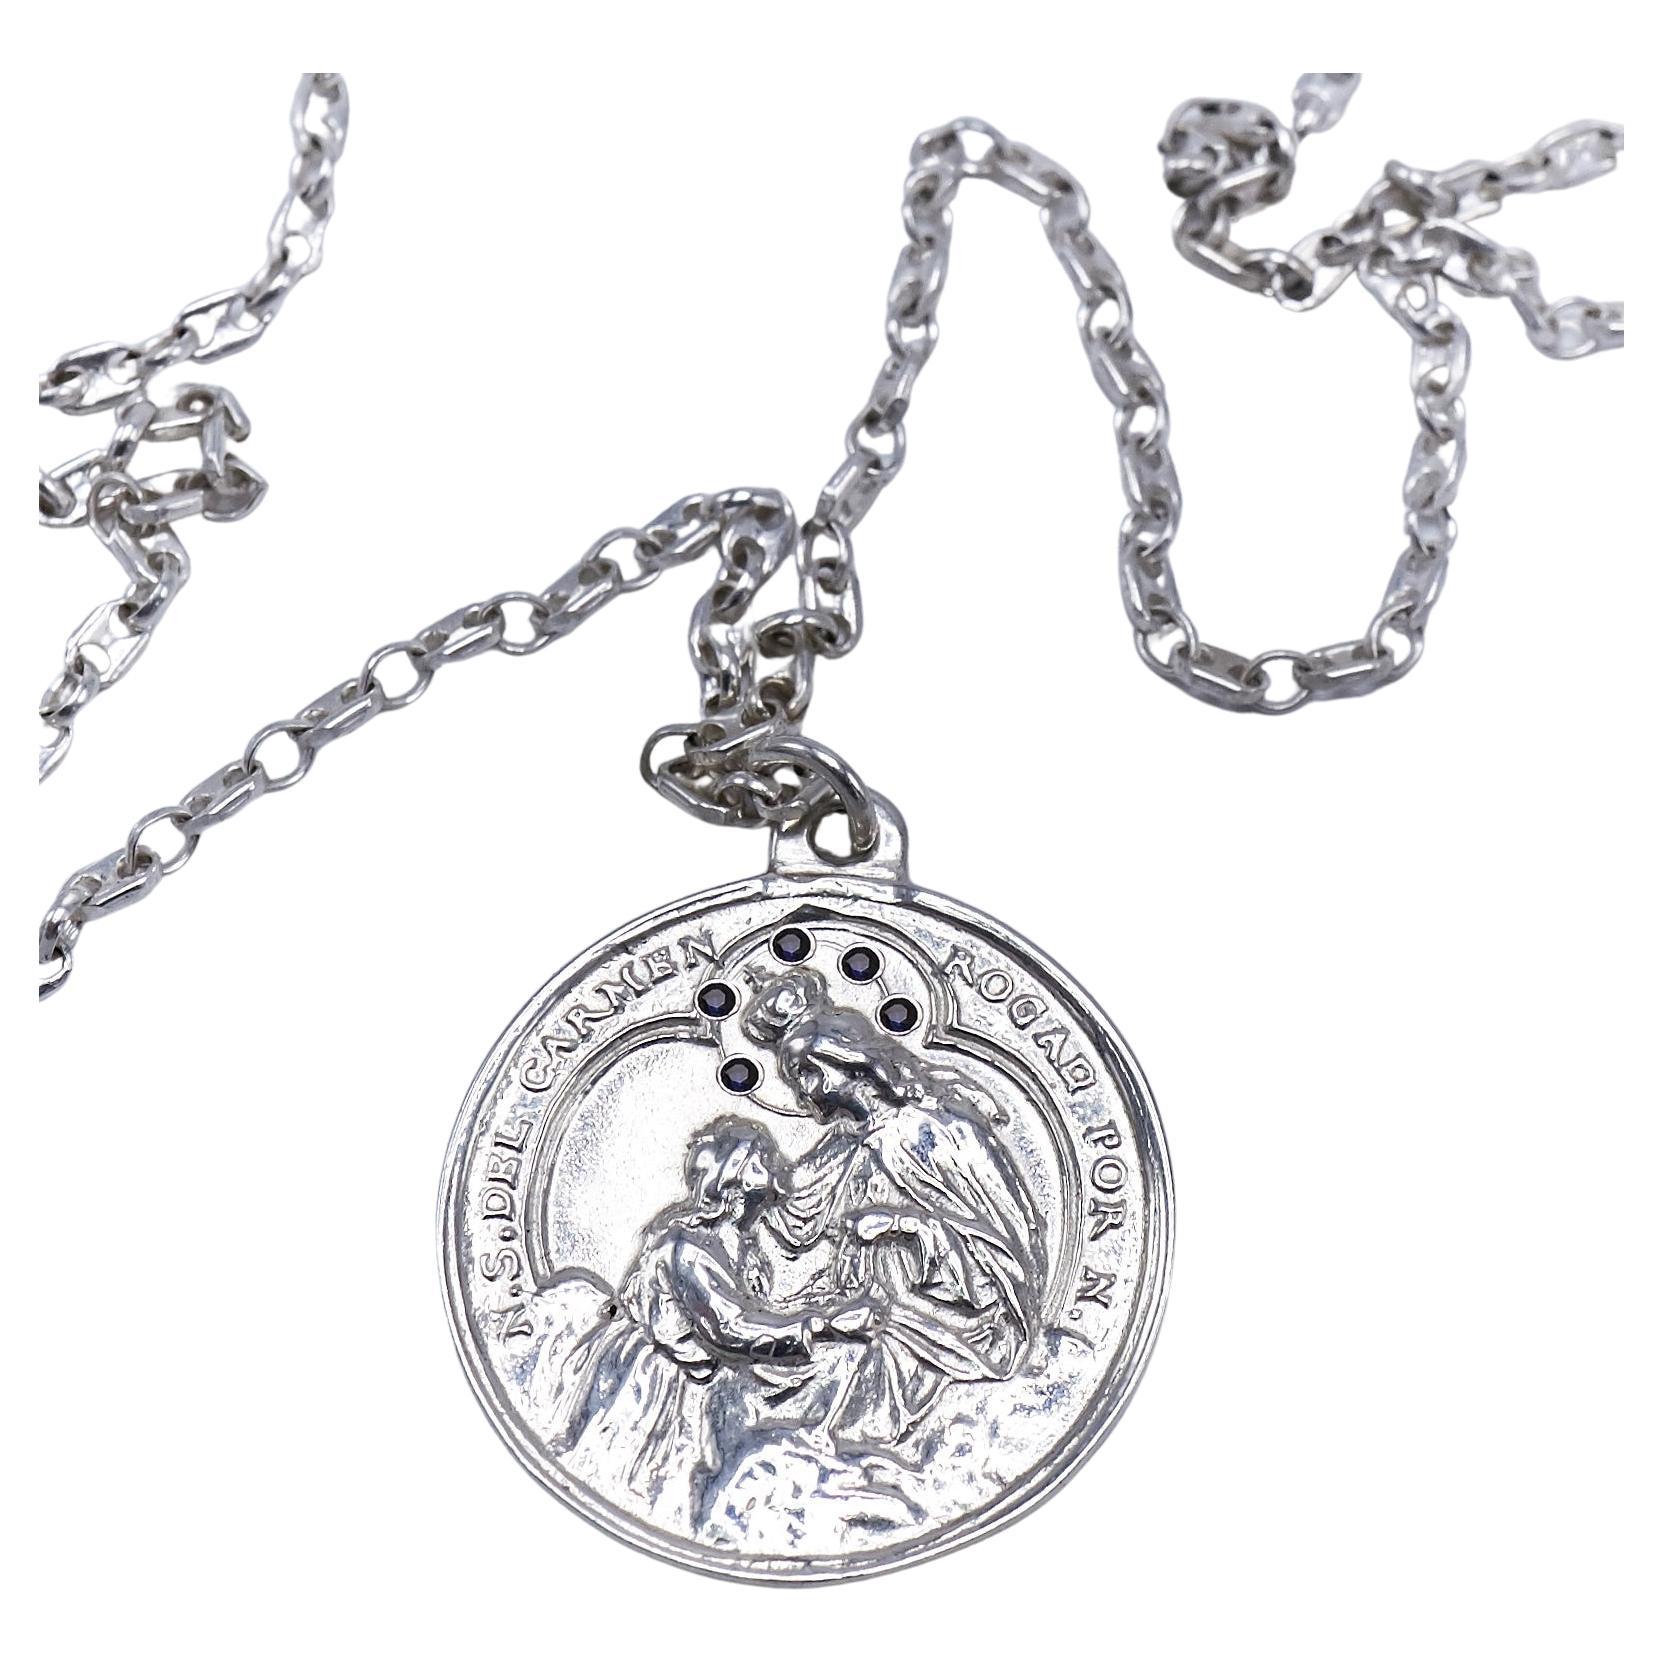 Medal Chain Necklace Miraculous Virgin Mary Black Diamond Silver J Dauphin